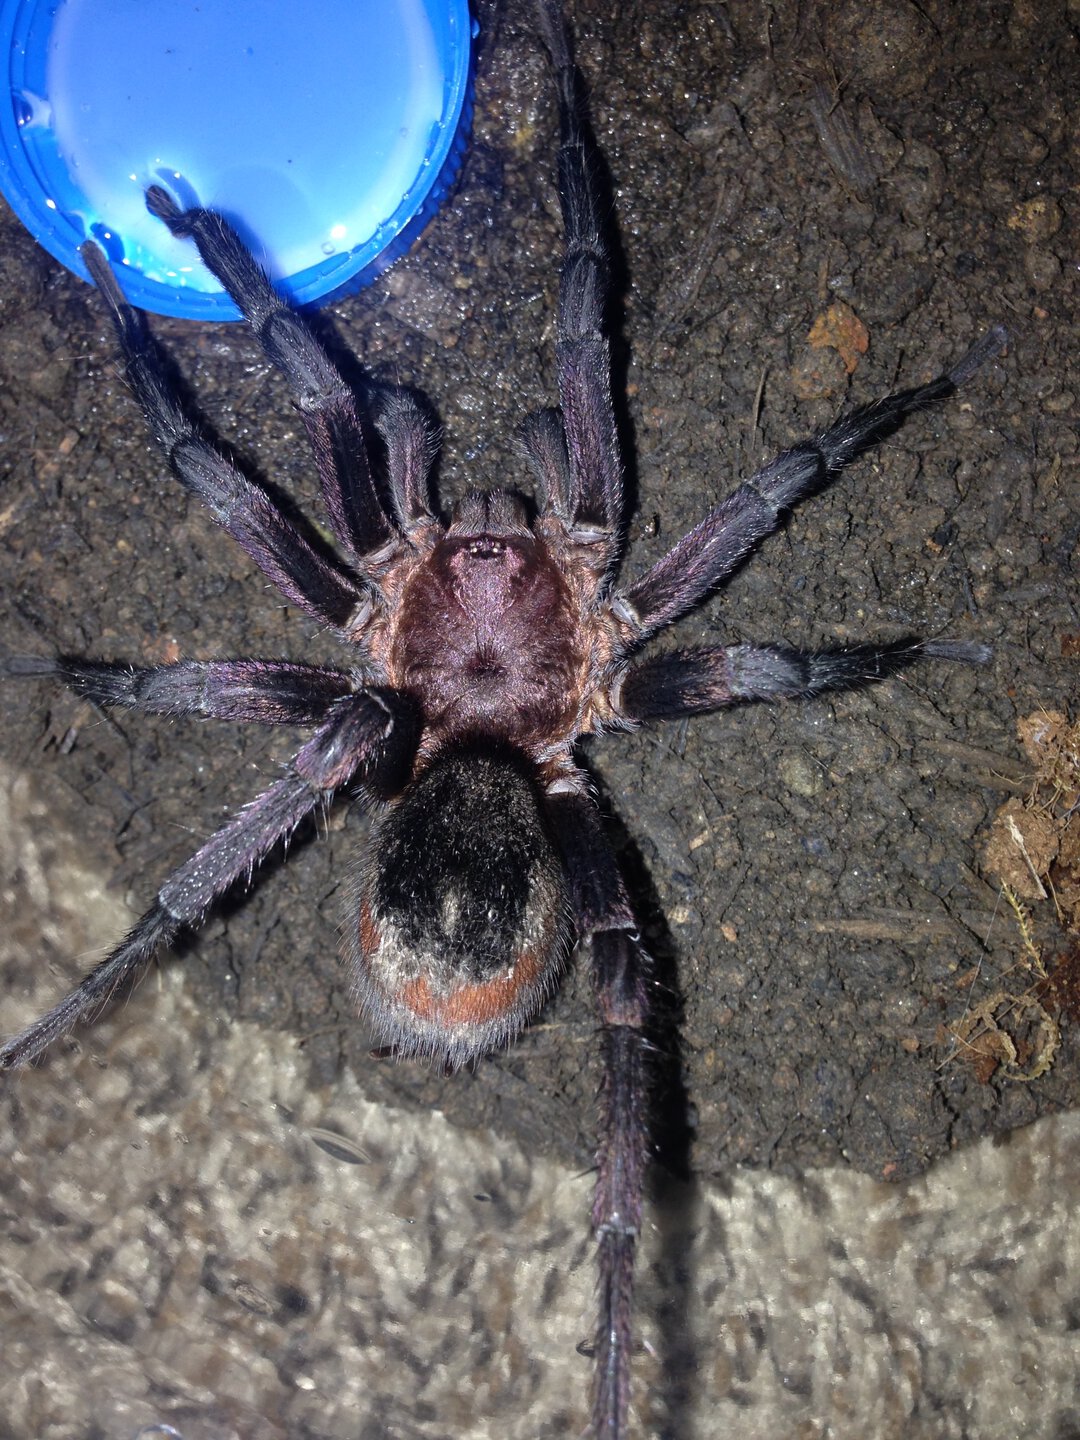 Bumba cabocla Mature Male (Synonymized as B. horrida now)